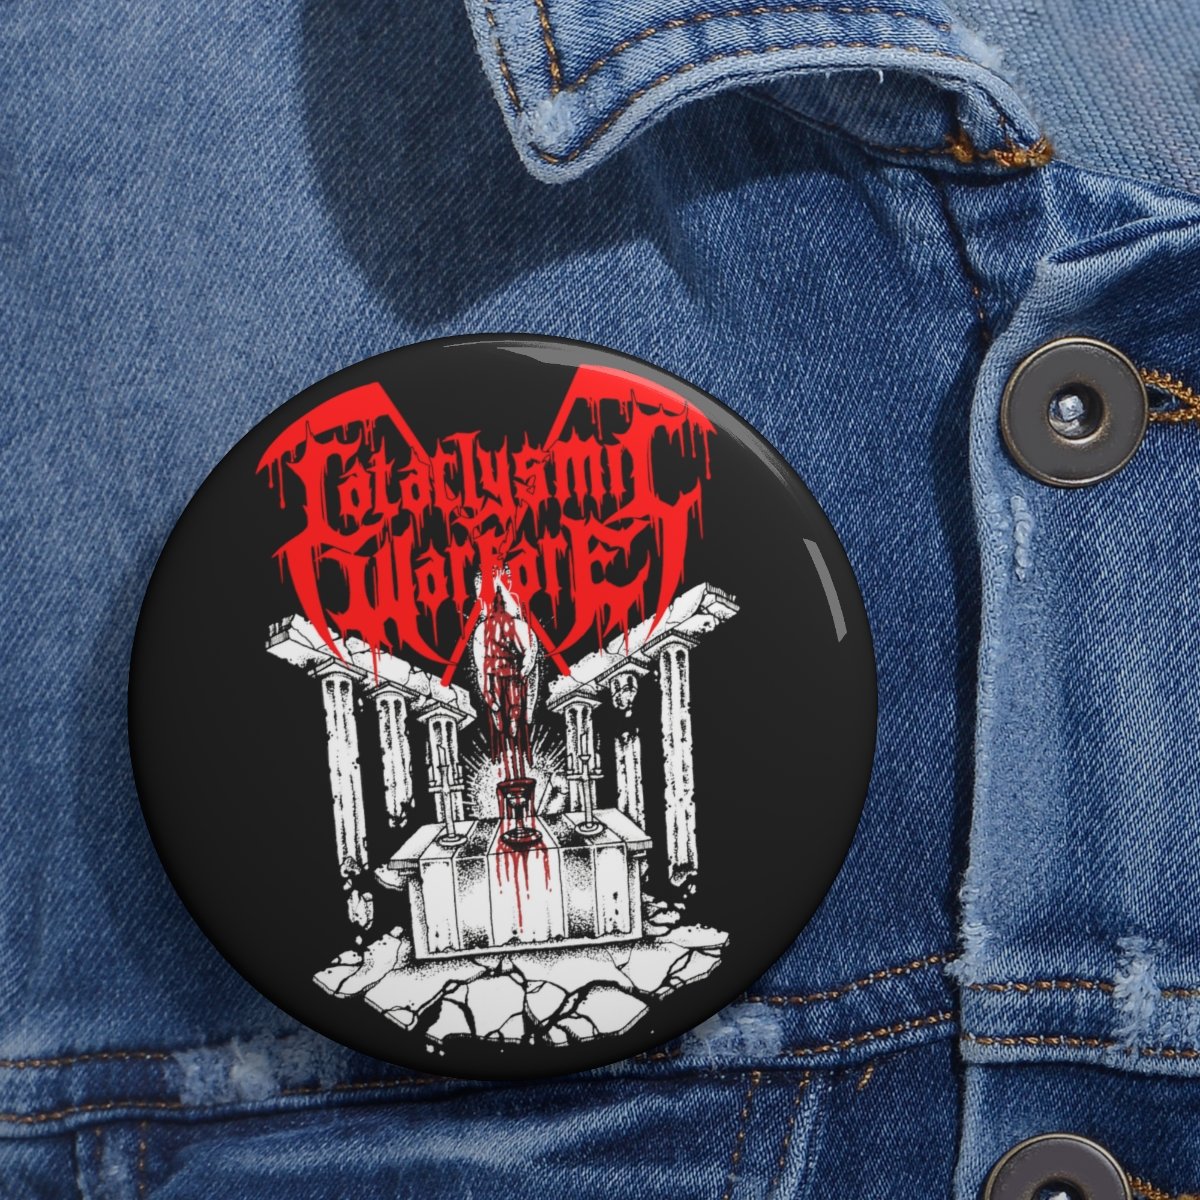 Cataclysmic Warfare – Drink The Blood Pin Buttons